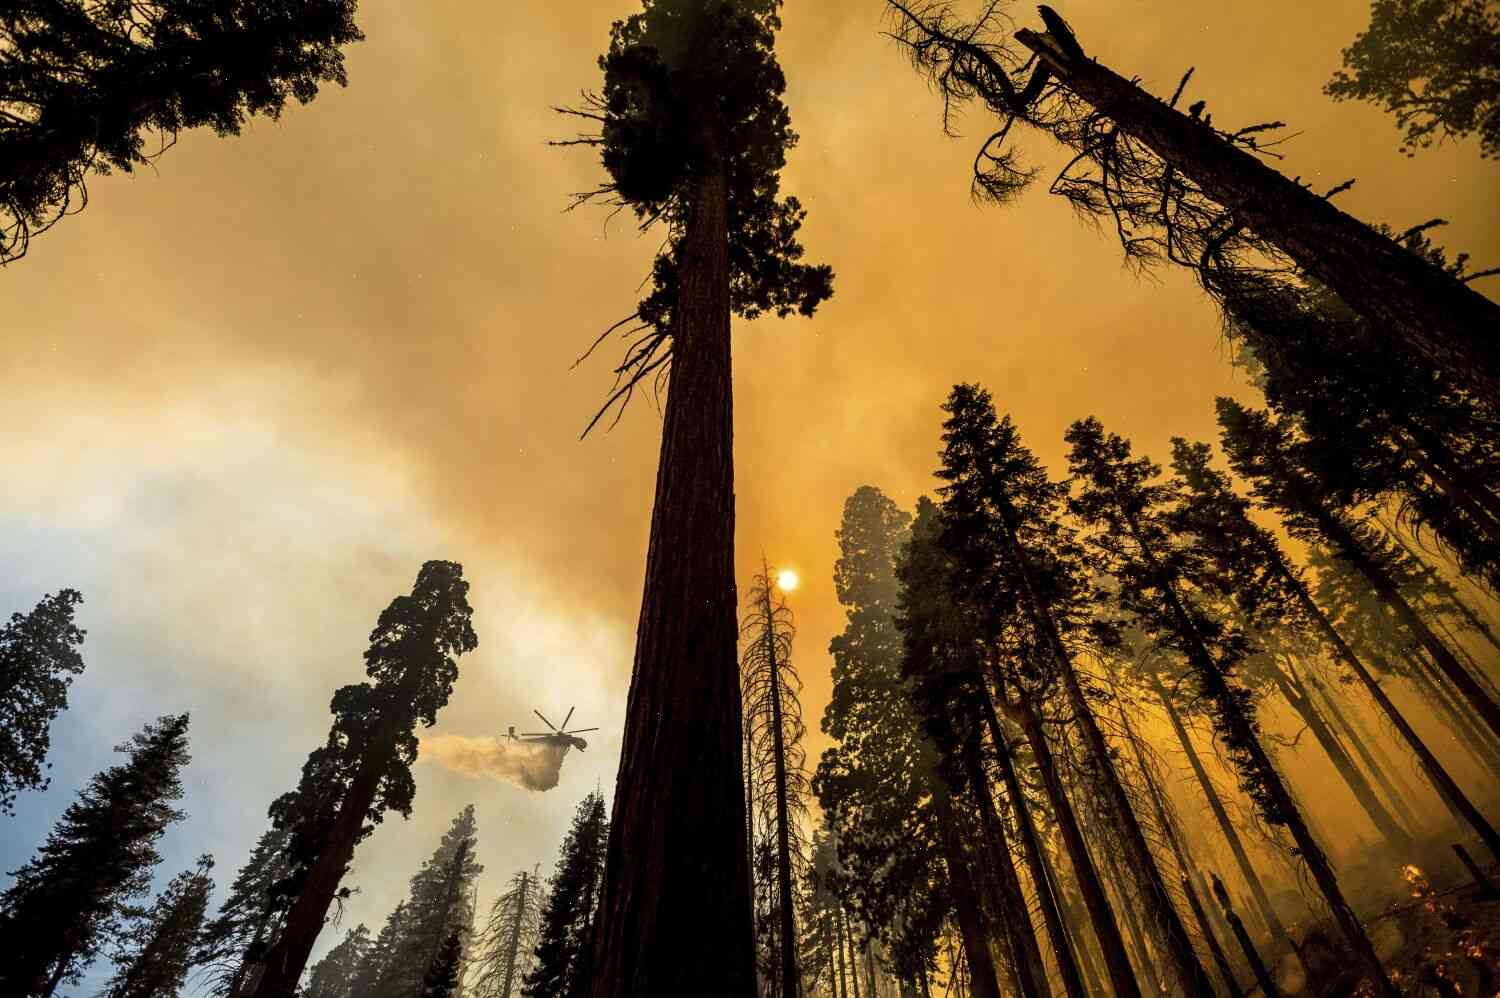 Wildfires are the focus of a new study to understand the drought and fires